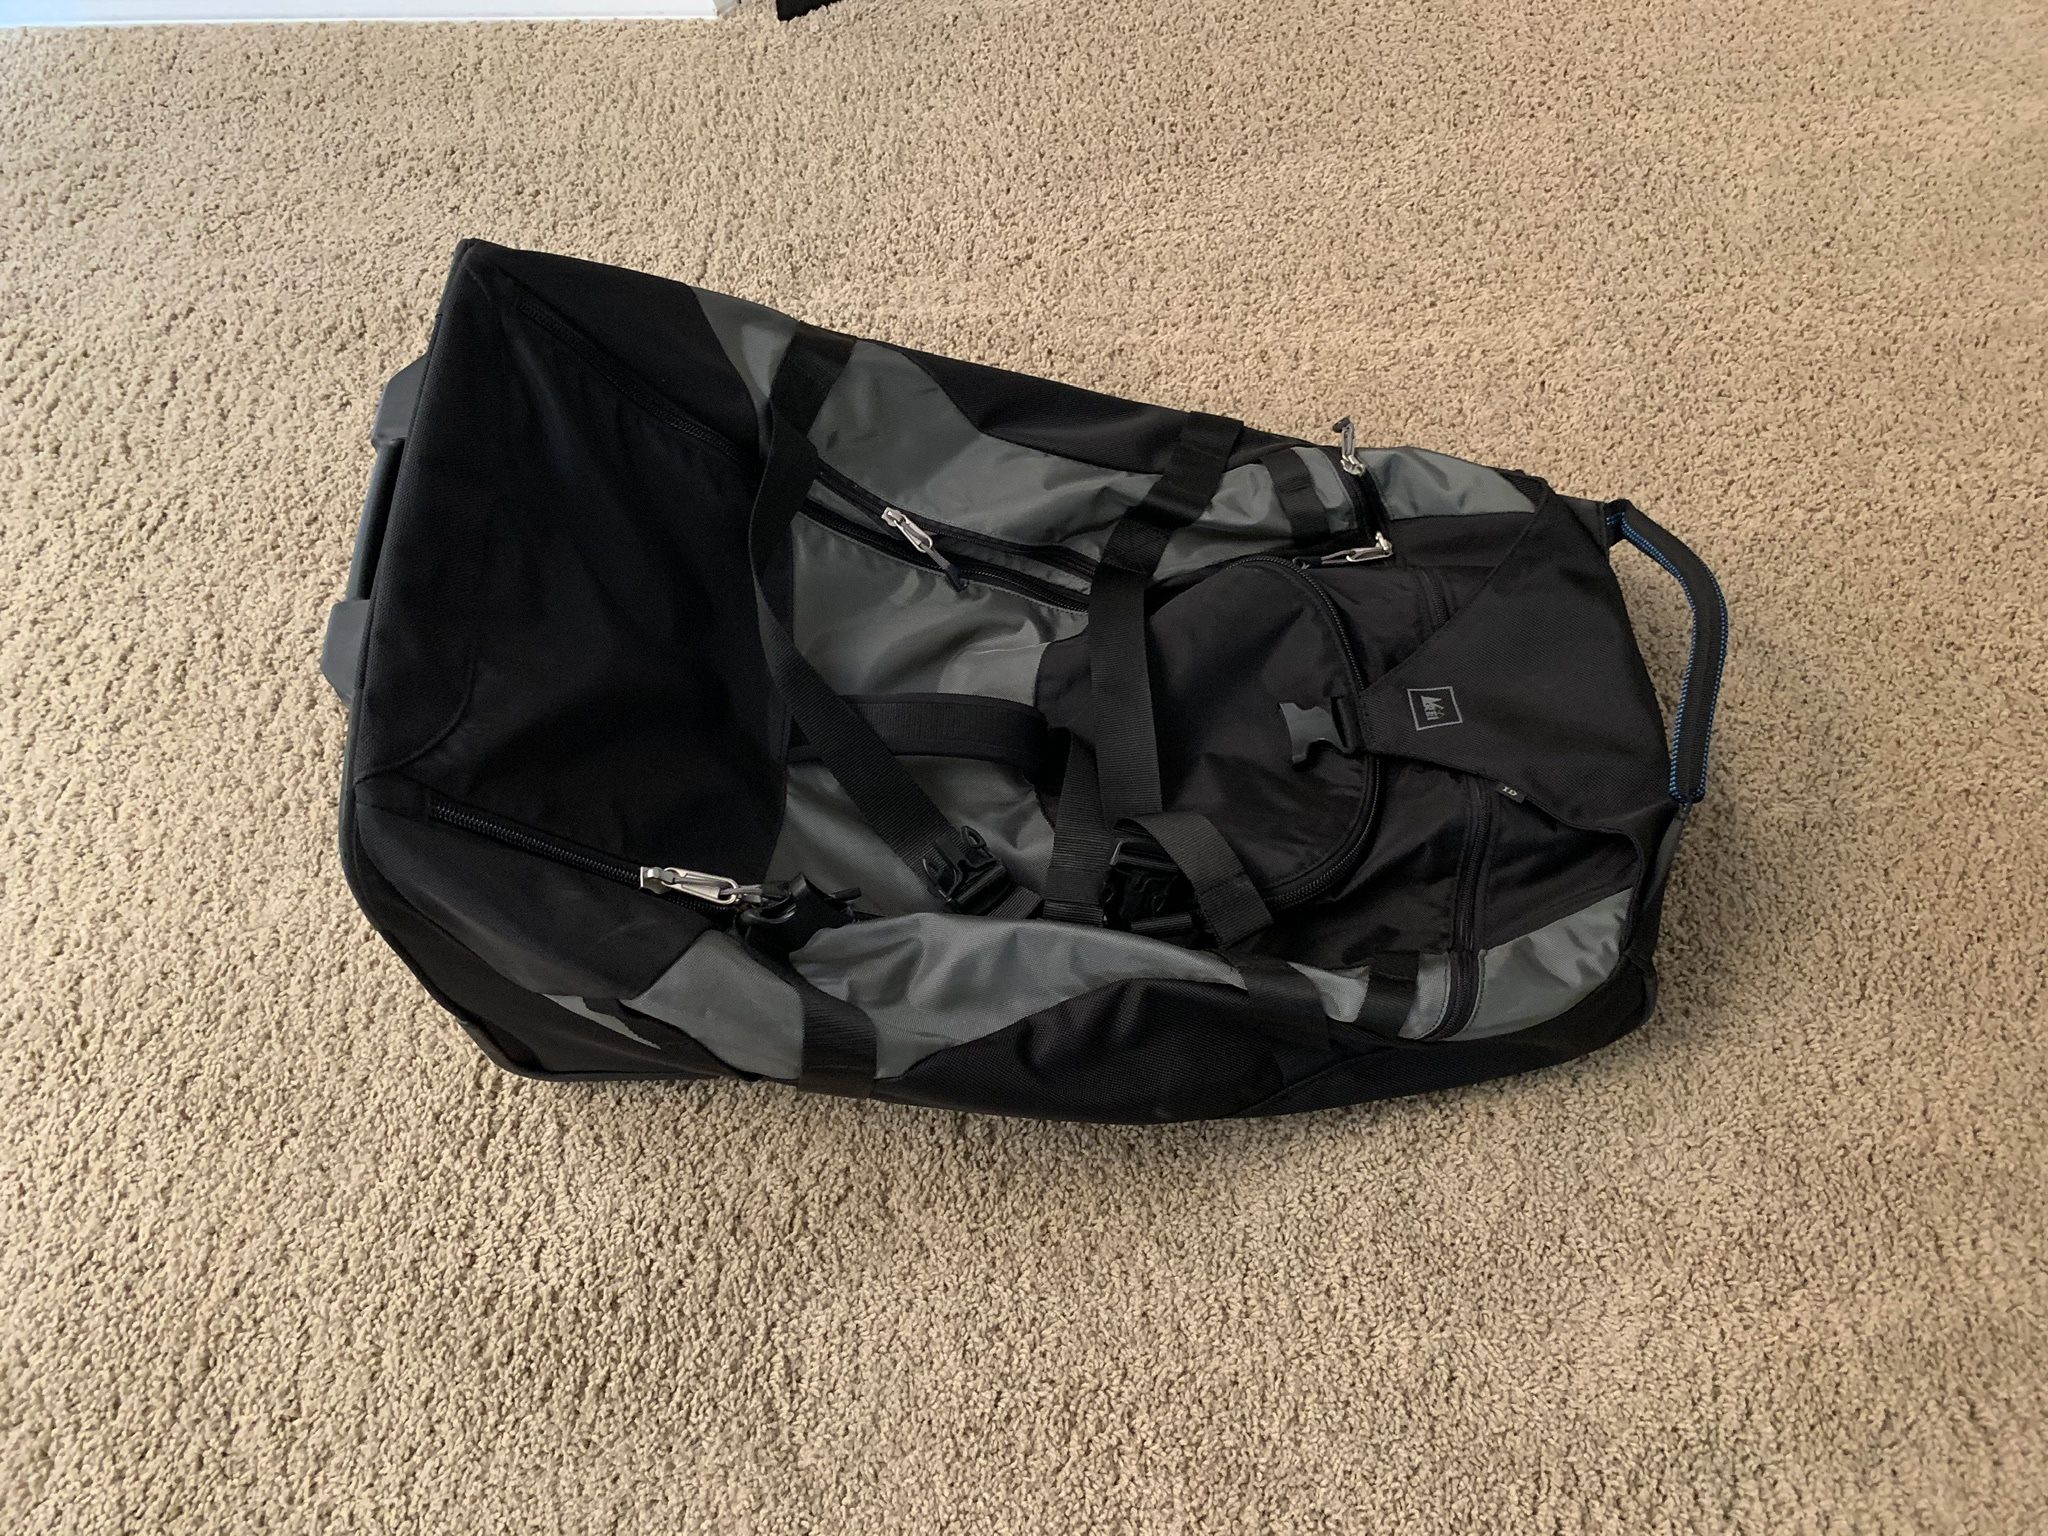 Large REI Roller Duffle bag - lightly used